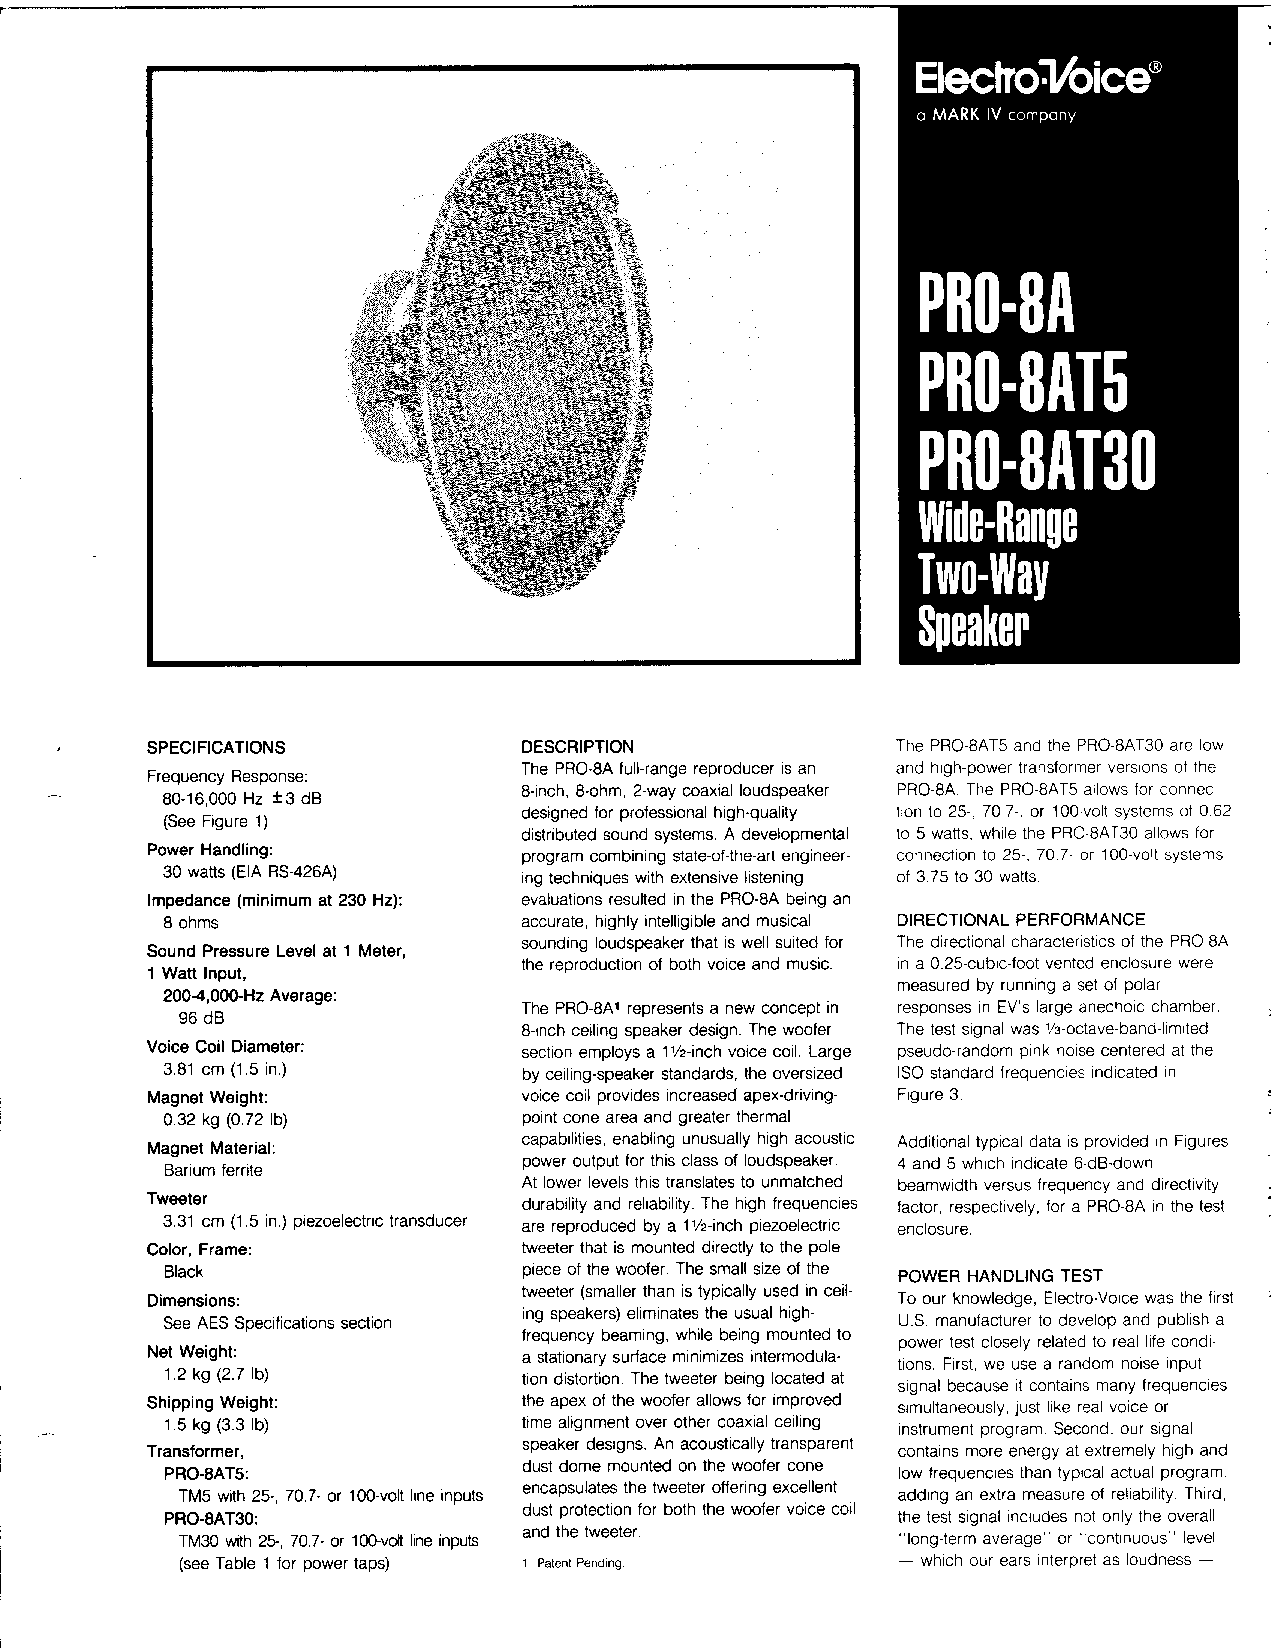 Electro-Voice PRO-8AT30, PRO-8AT5, PRO-8A User Manual